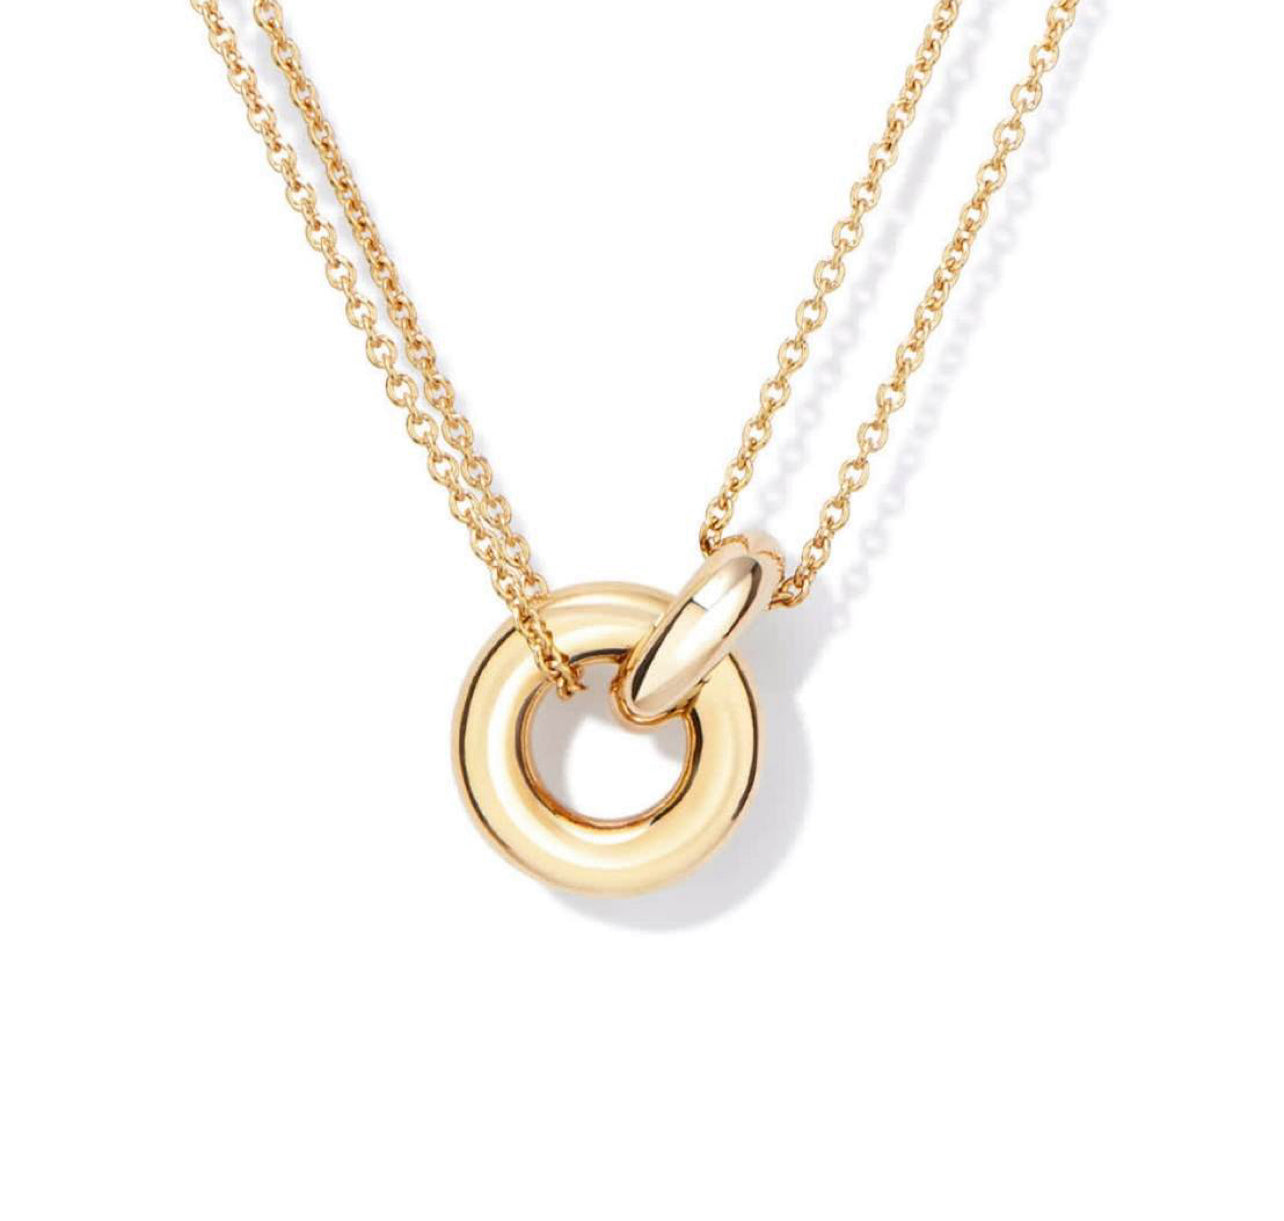 DAINTY DOUBLE CIRCLE NECKLACE